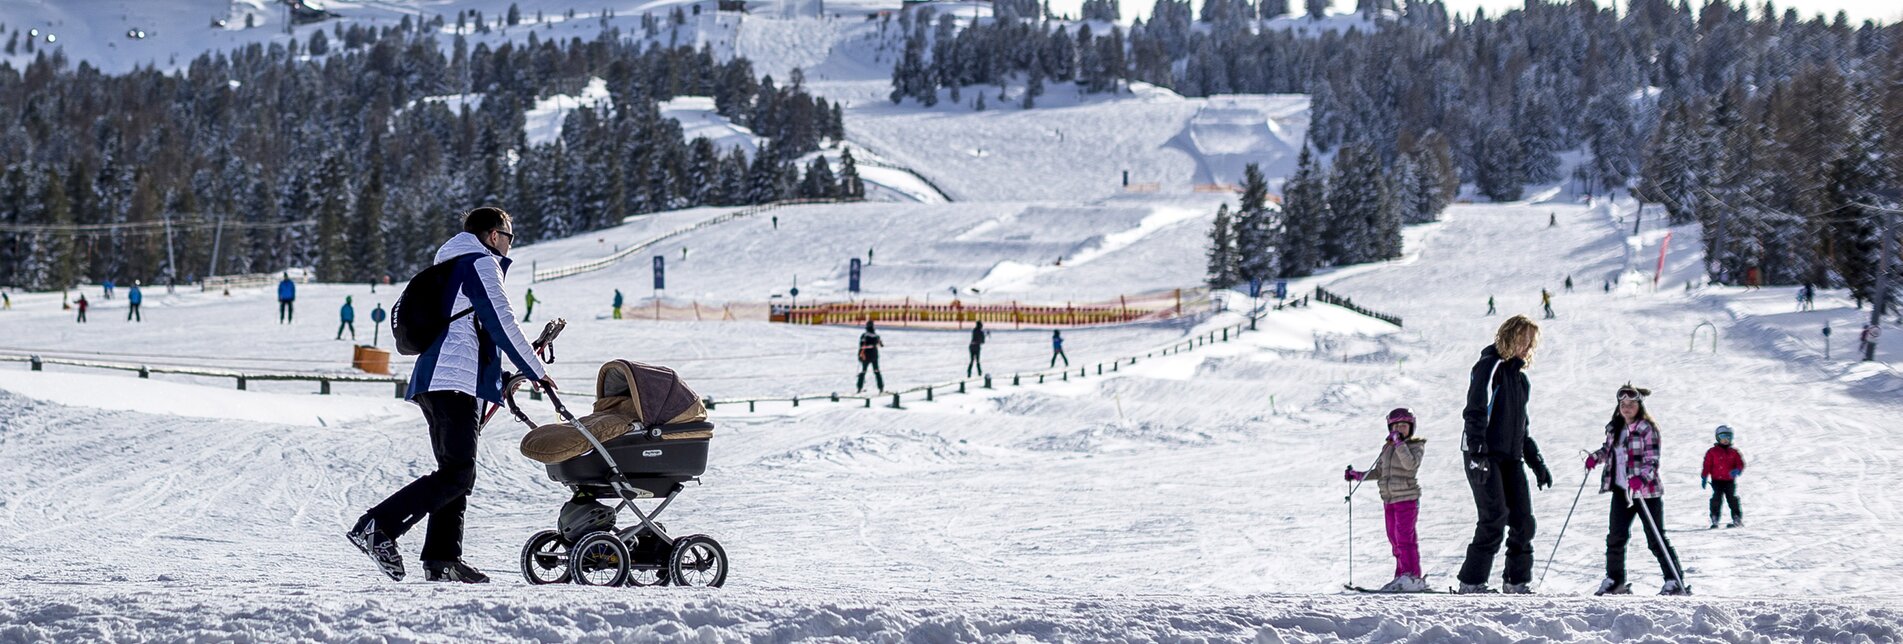 Ski opening for kids: the baby in the buggy has to be patient :-) | © Steiermark Tourismus | Tom Lamm